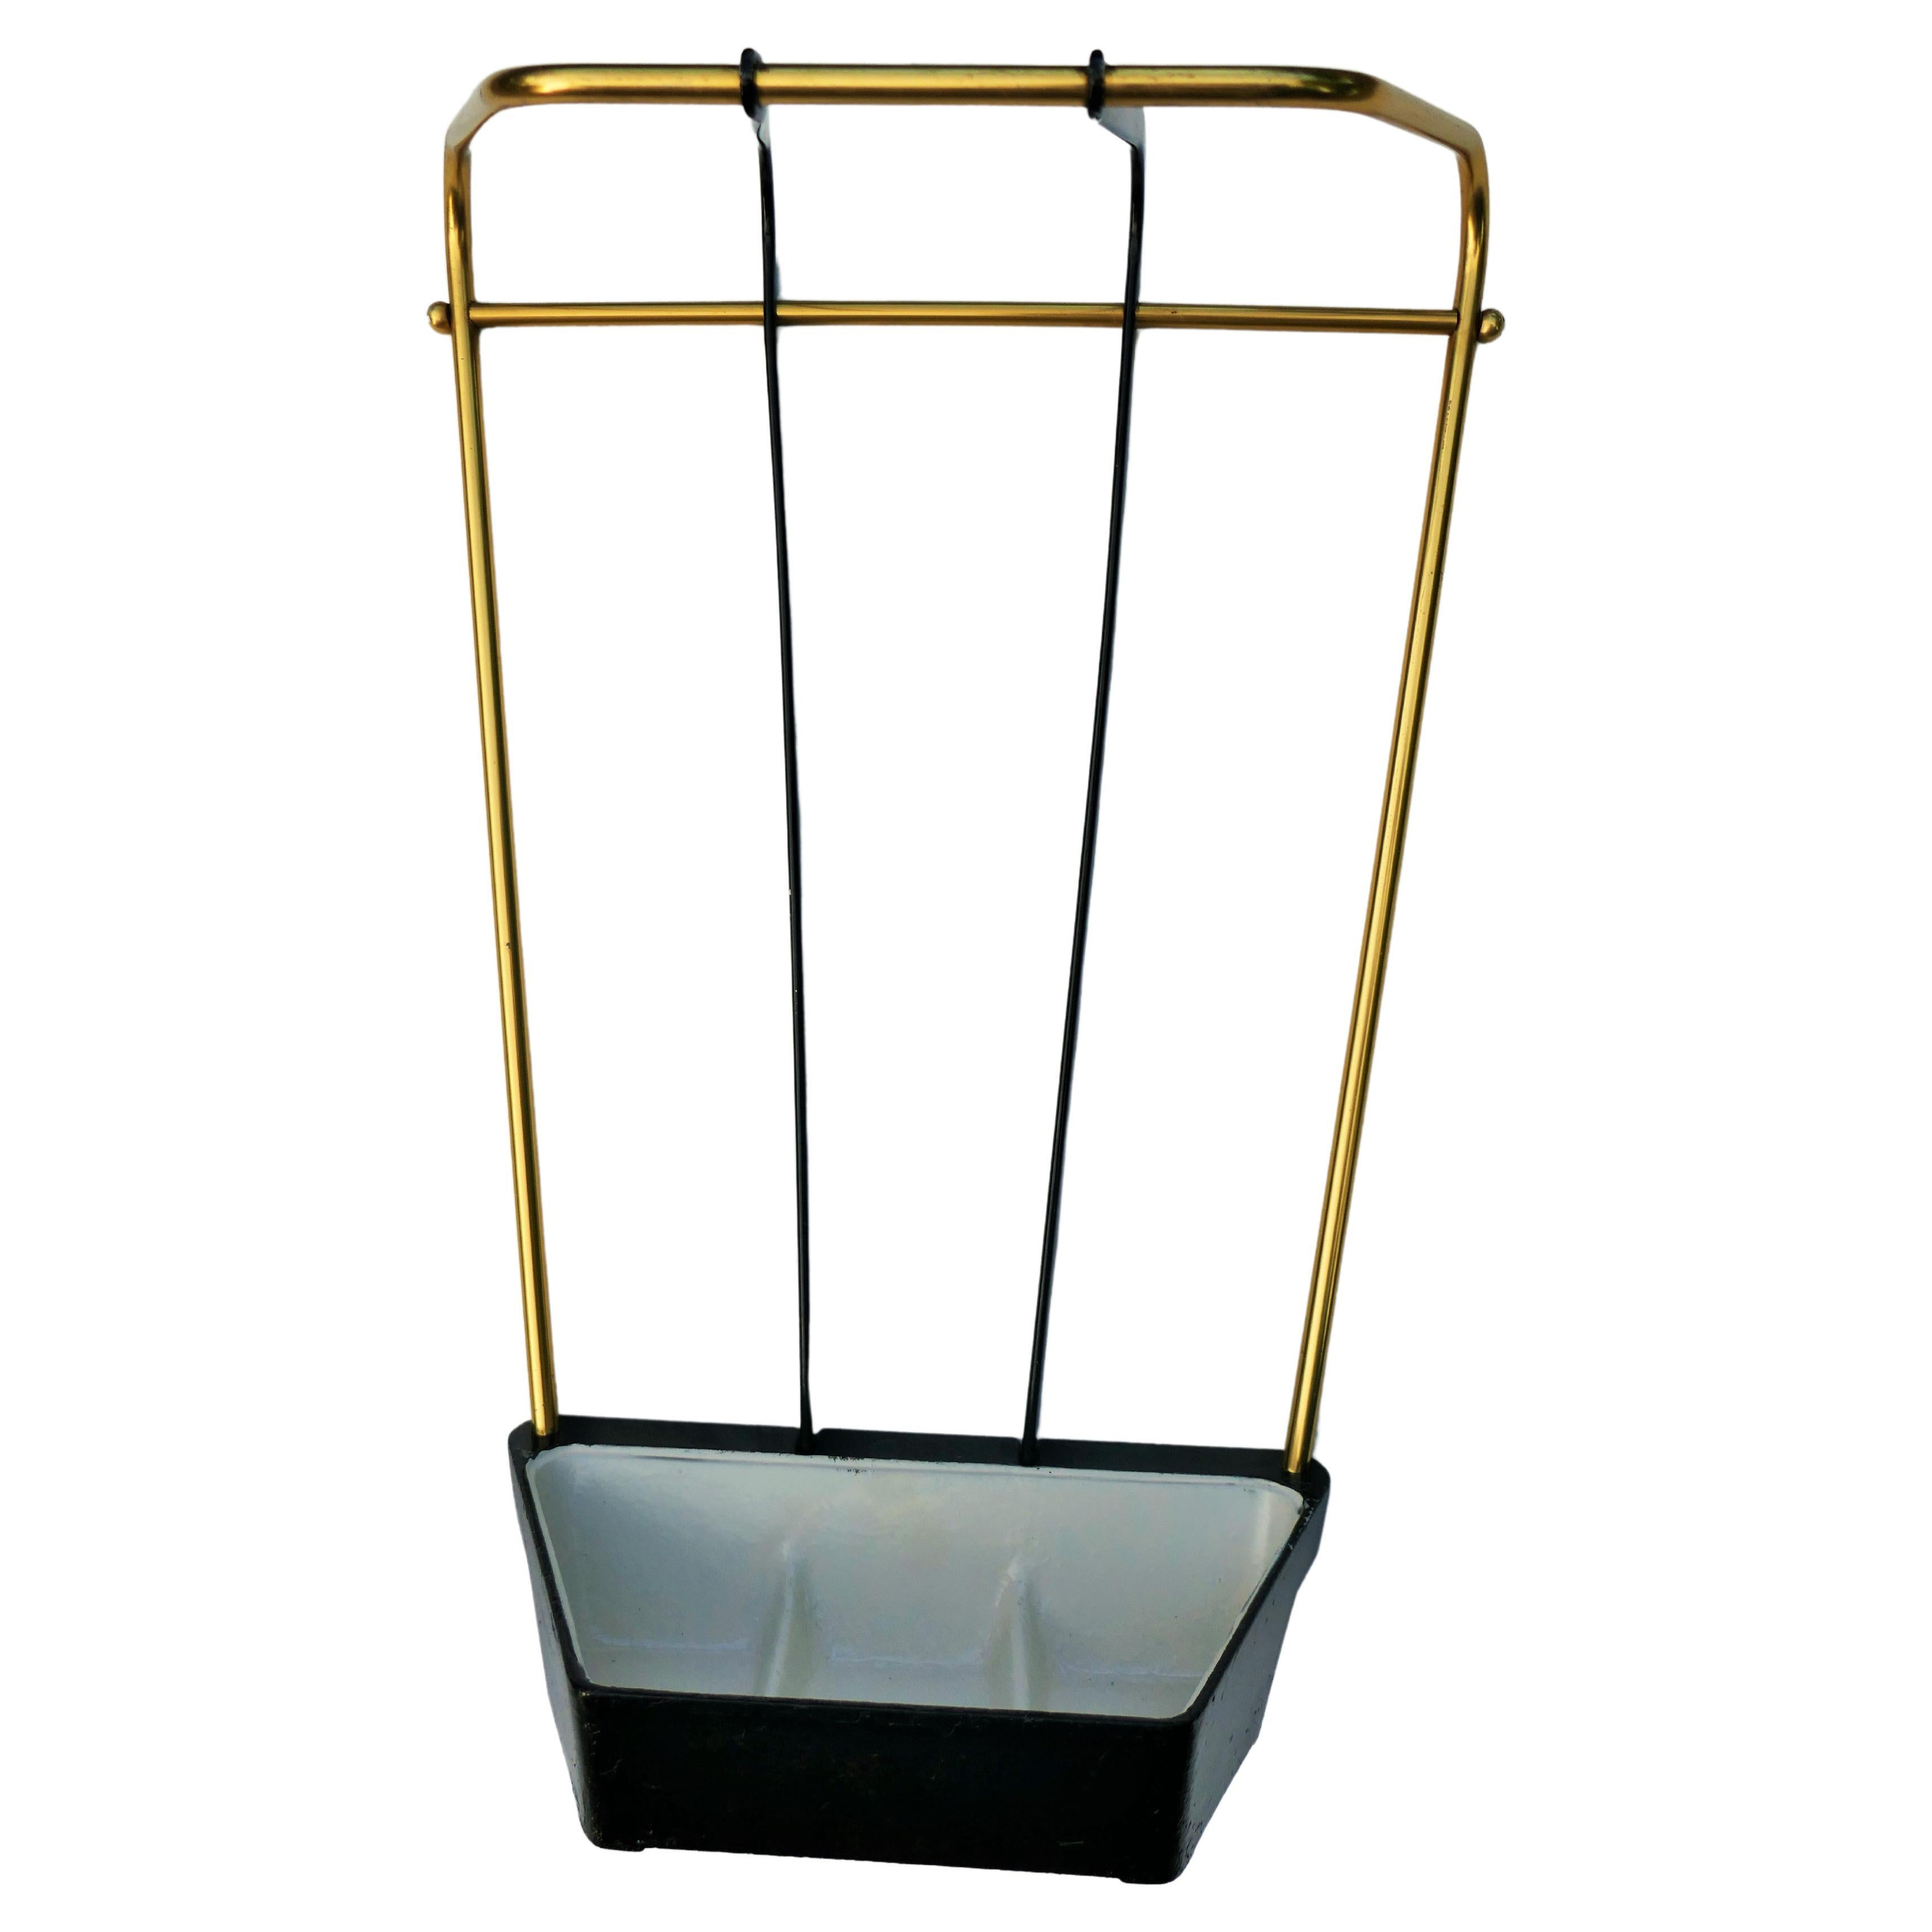 Brass, metal and cast iron umbrella stand possible German production.
The cast iron base has been repainted.
Under the base, company logo and numbered.
Good conditions.
Thank you